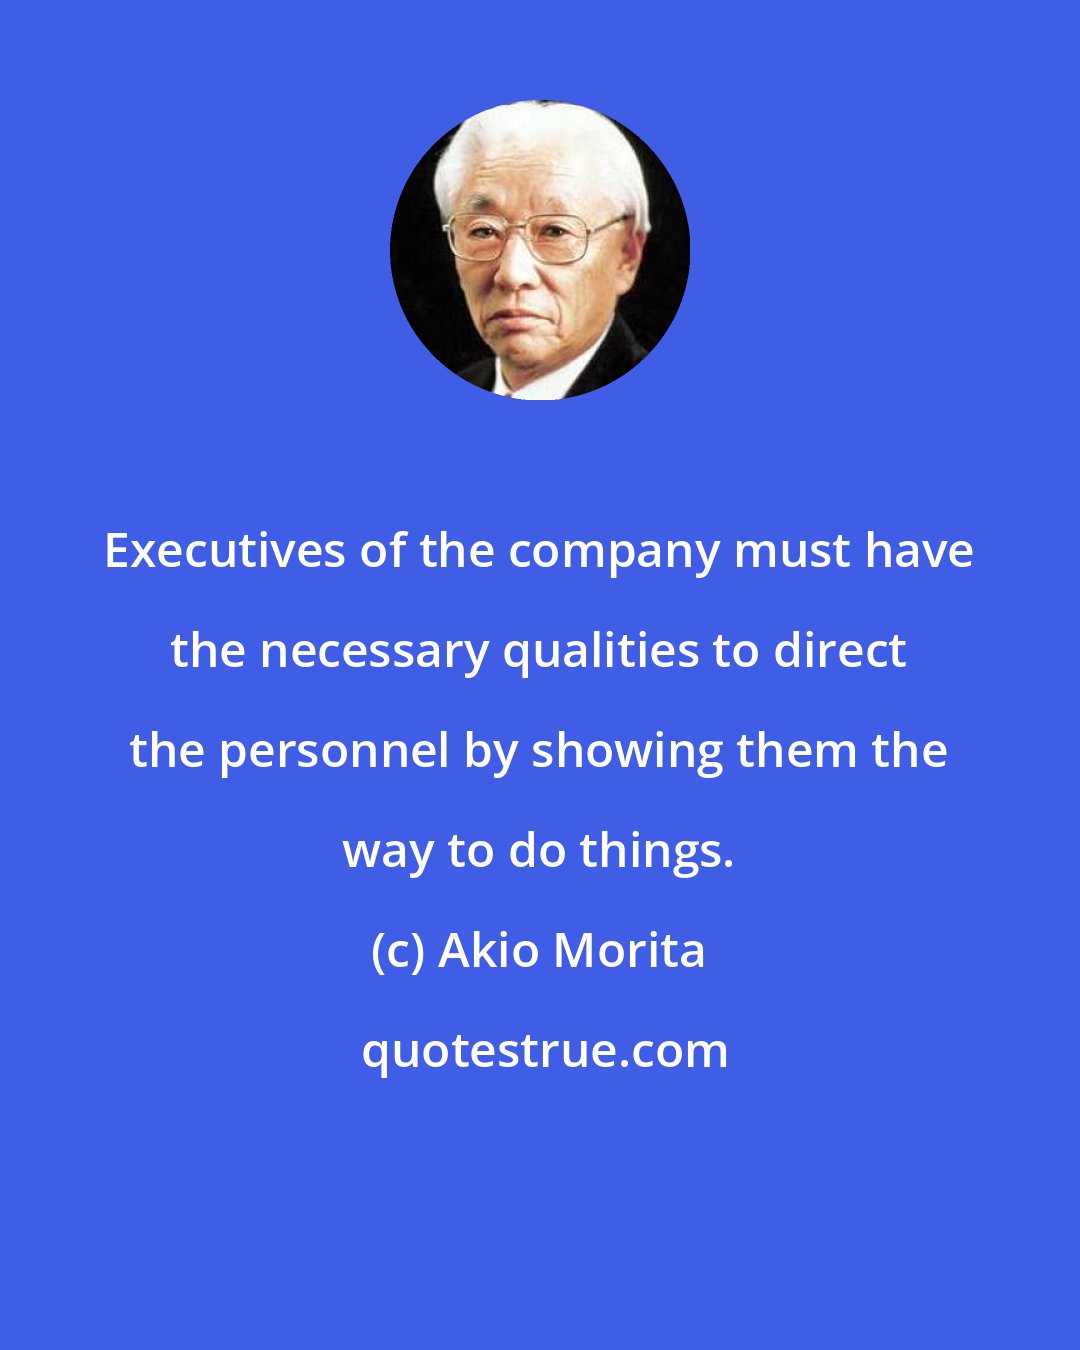 Akio Morita: Executives of the company must have the necessary qualities to direct the personnel by showing them the way to do things.